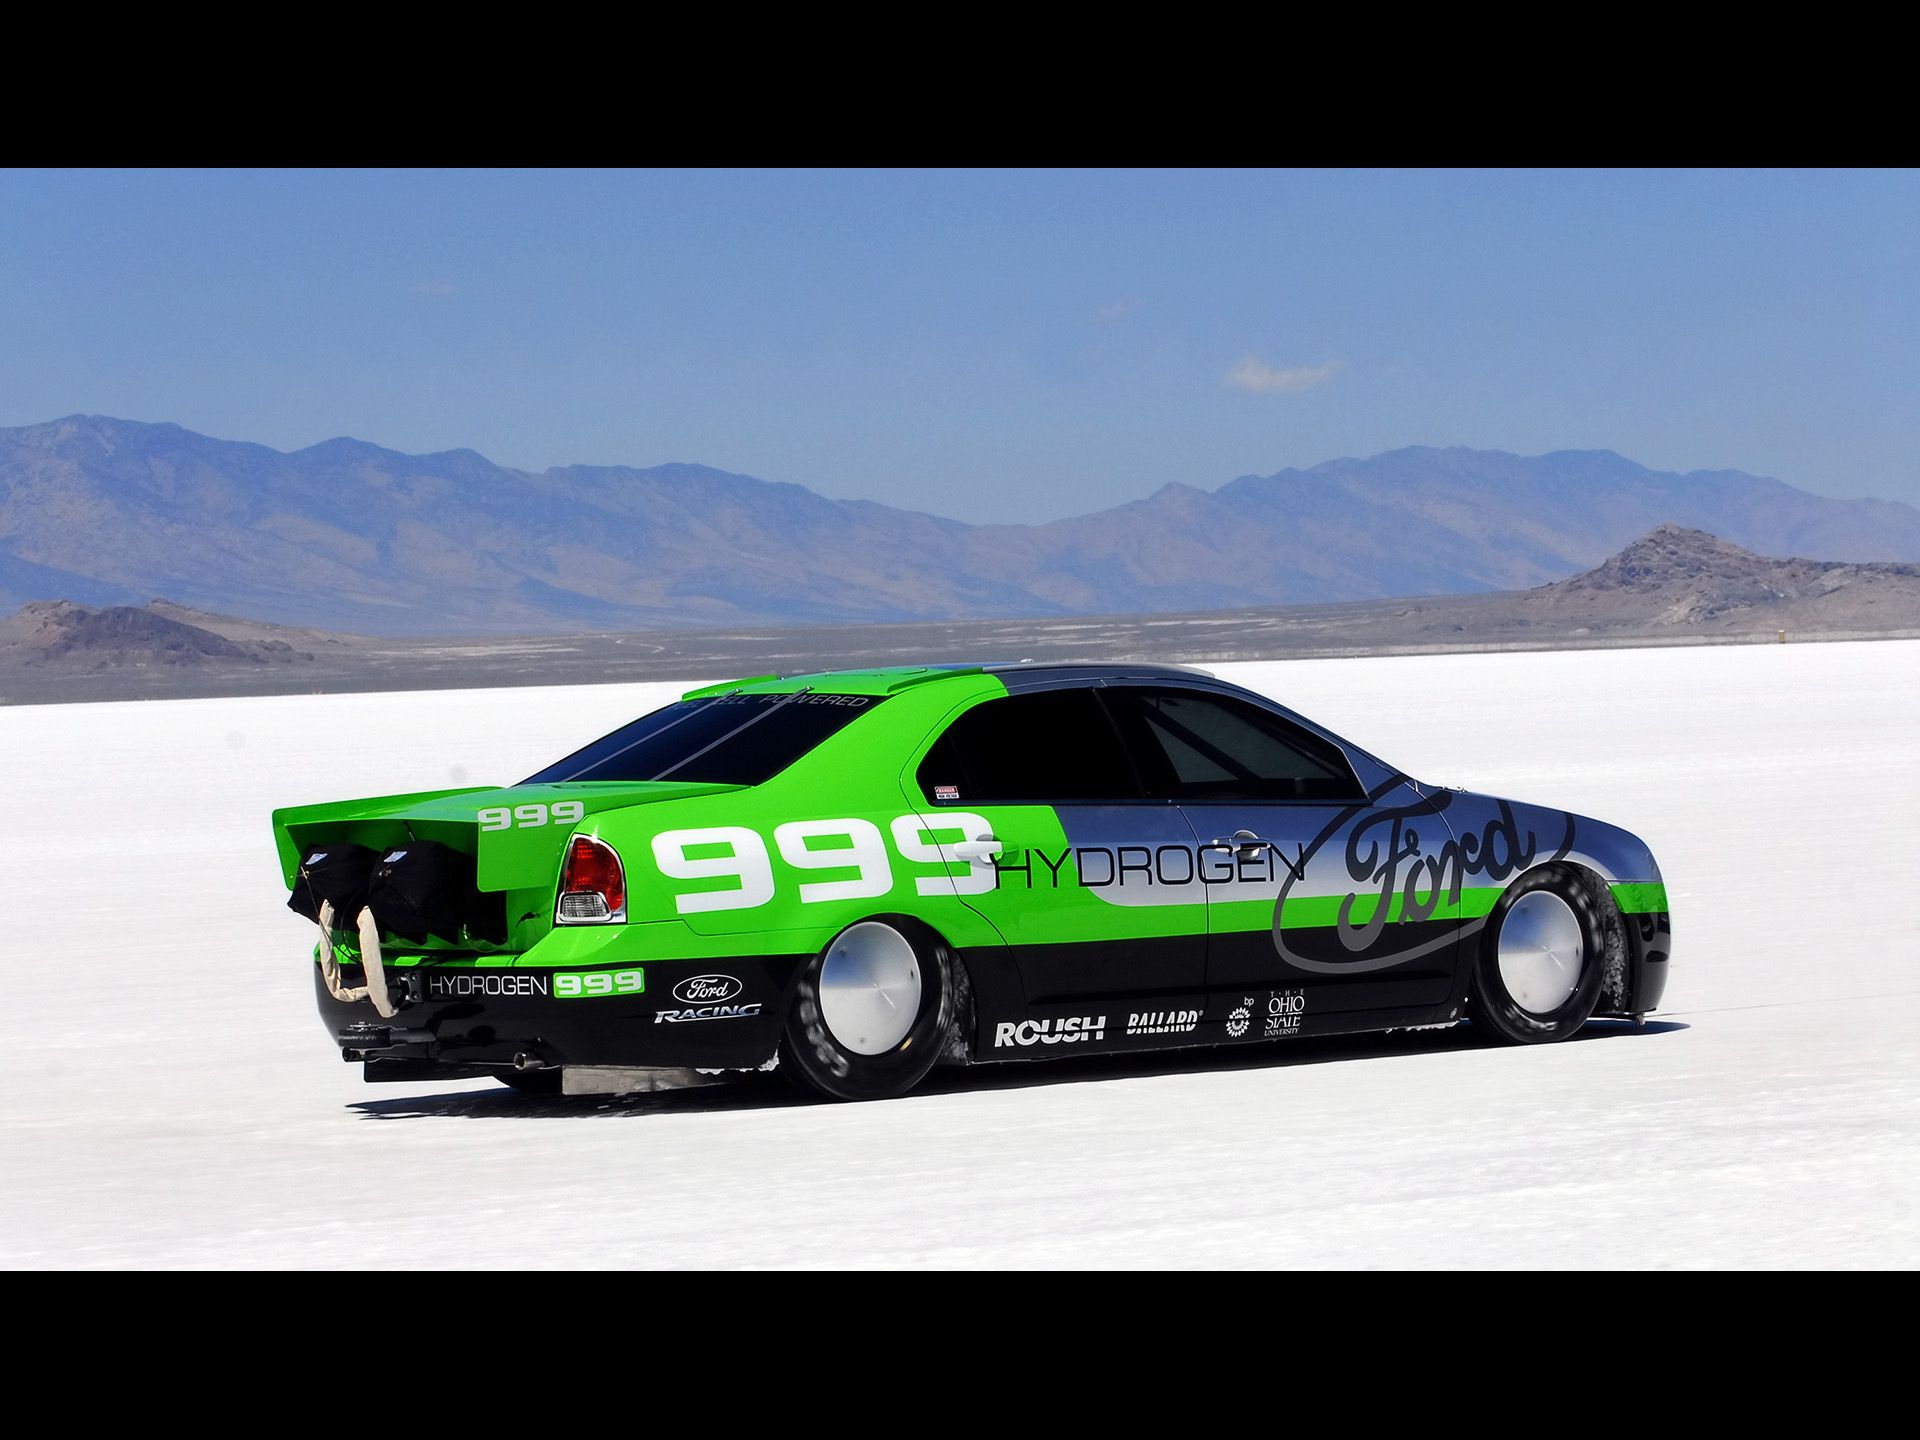 2007, Ford, Fusion, Hydrogen, 999, Speed record, Tuning, Race, Racing Wallpaper